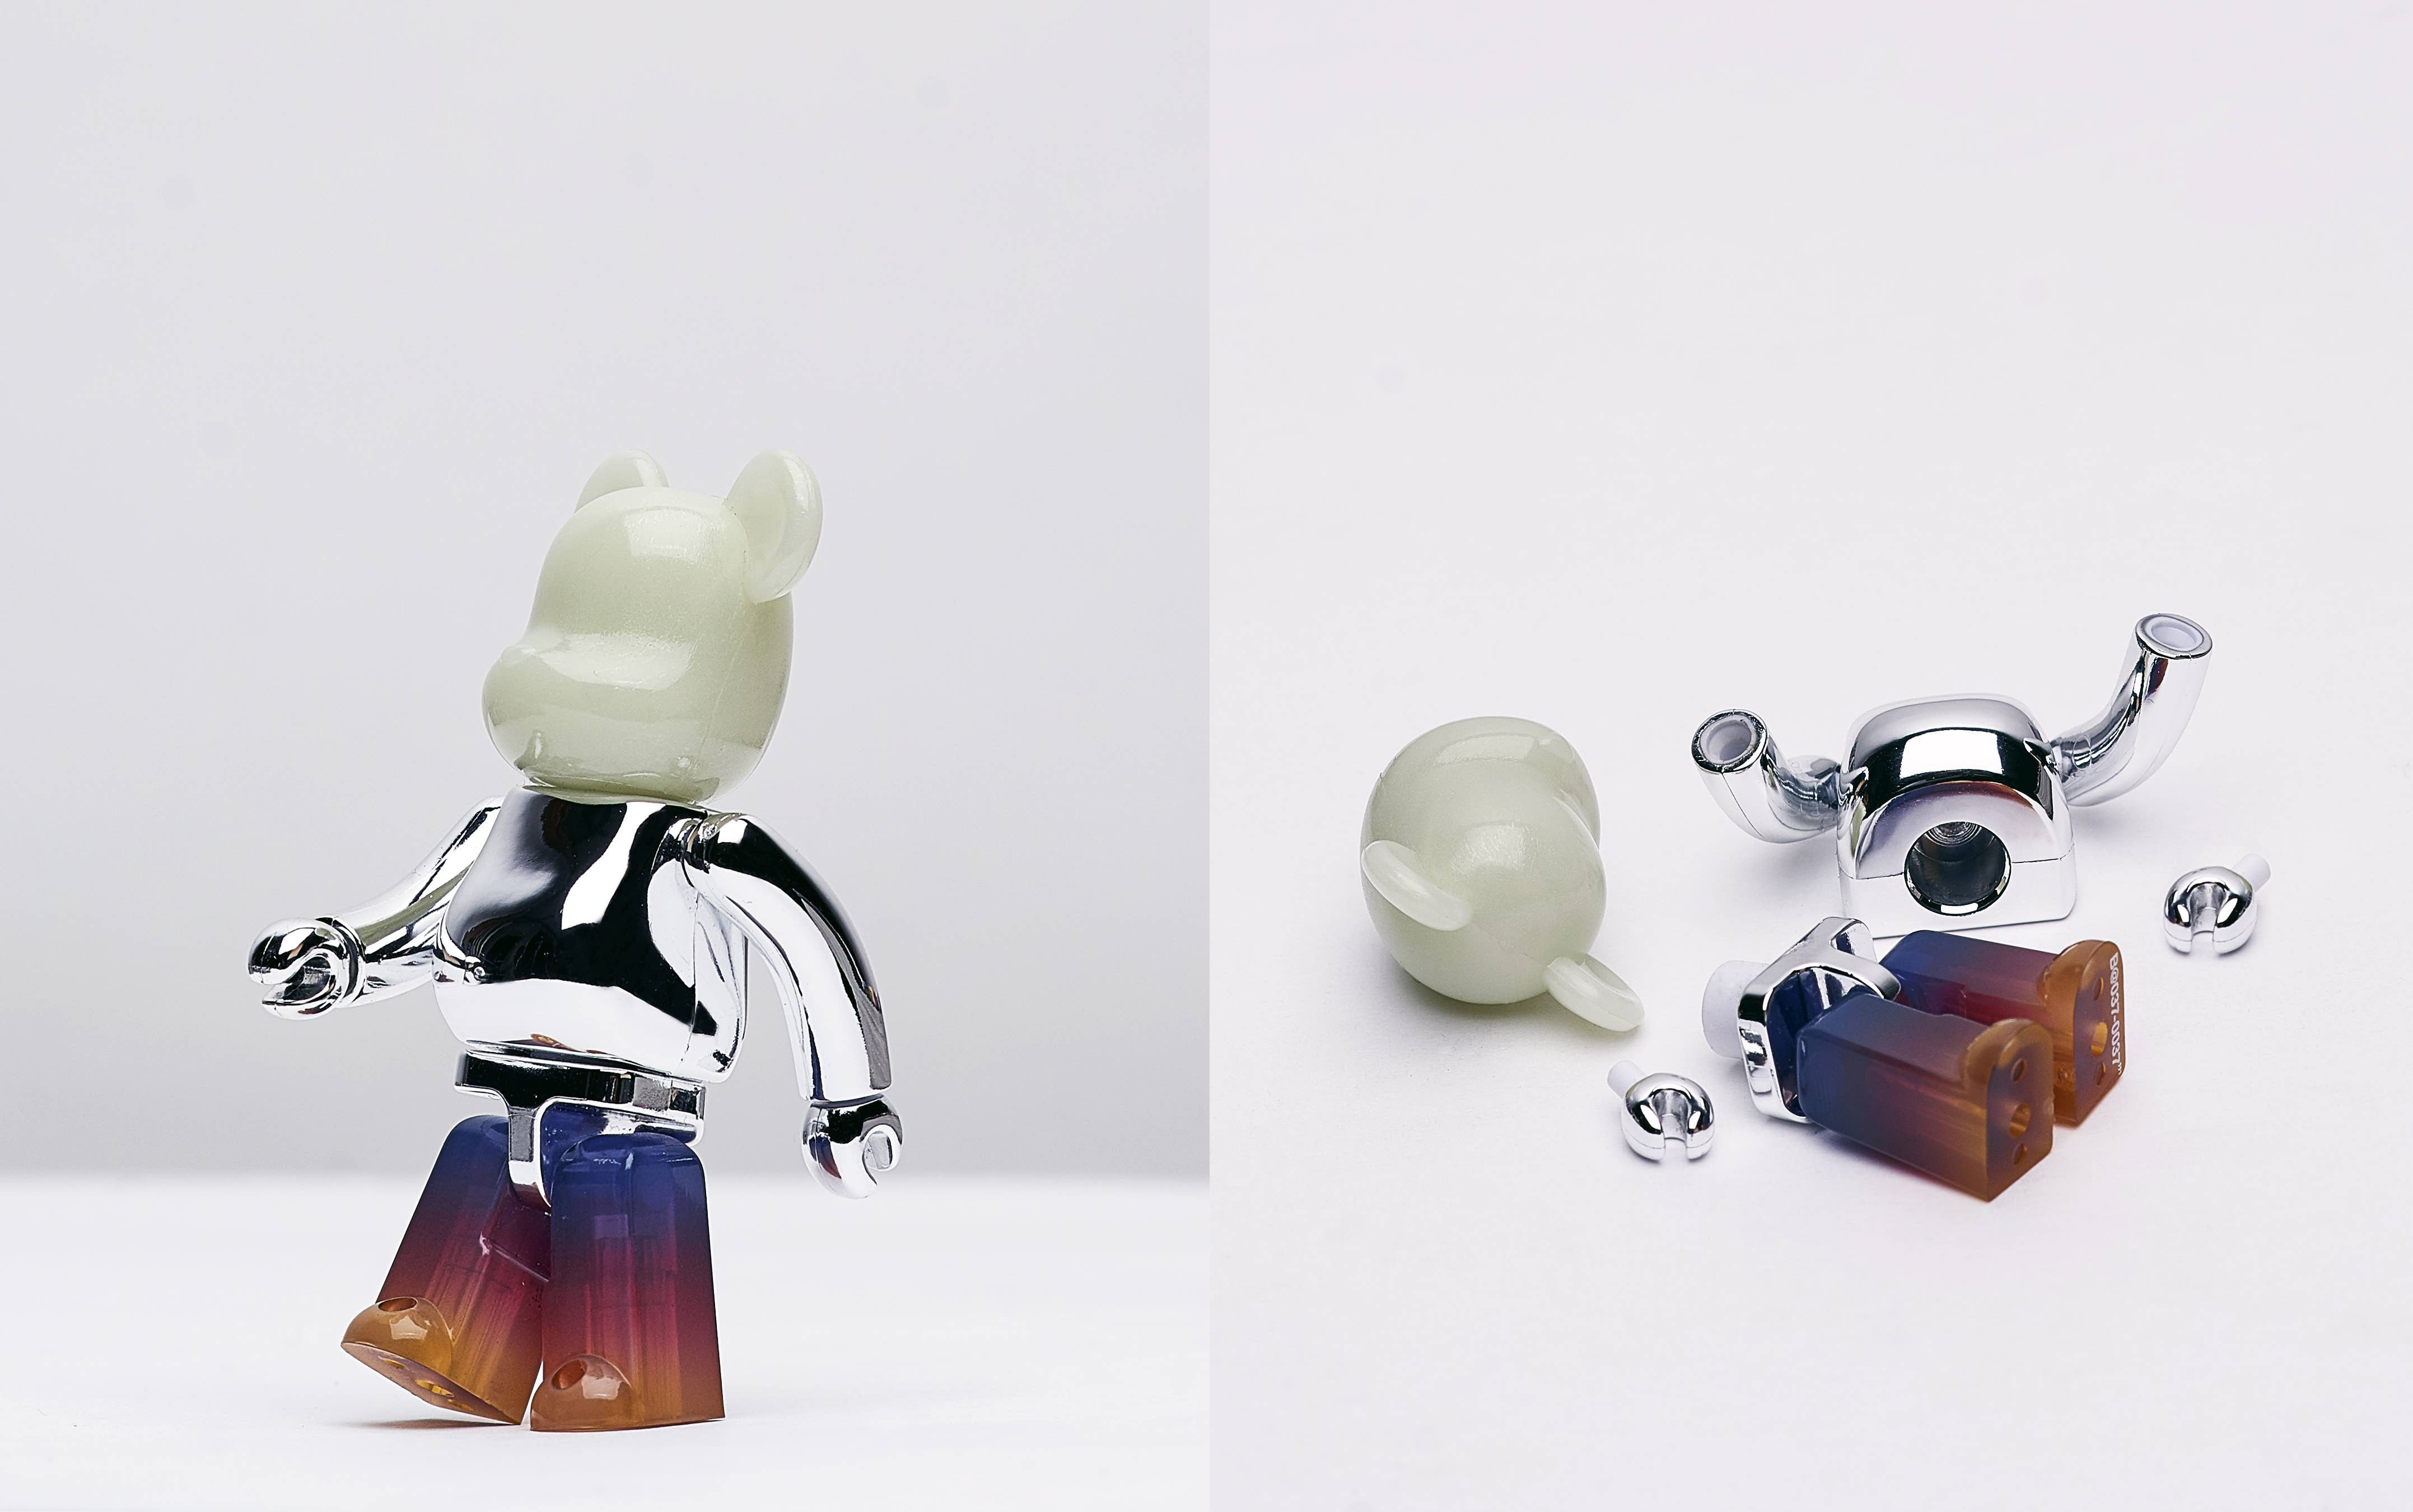 The Exclusive GEO x Medicom BE@RBRICK Offers Varied Perspectives on Light